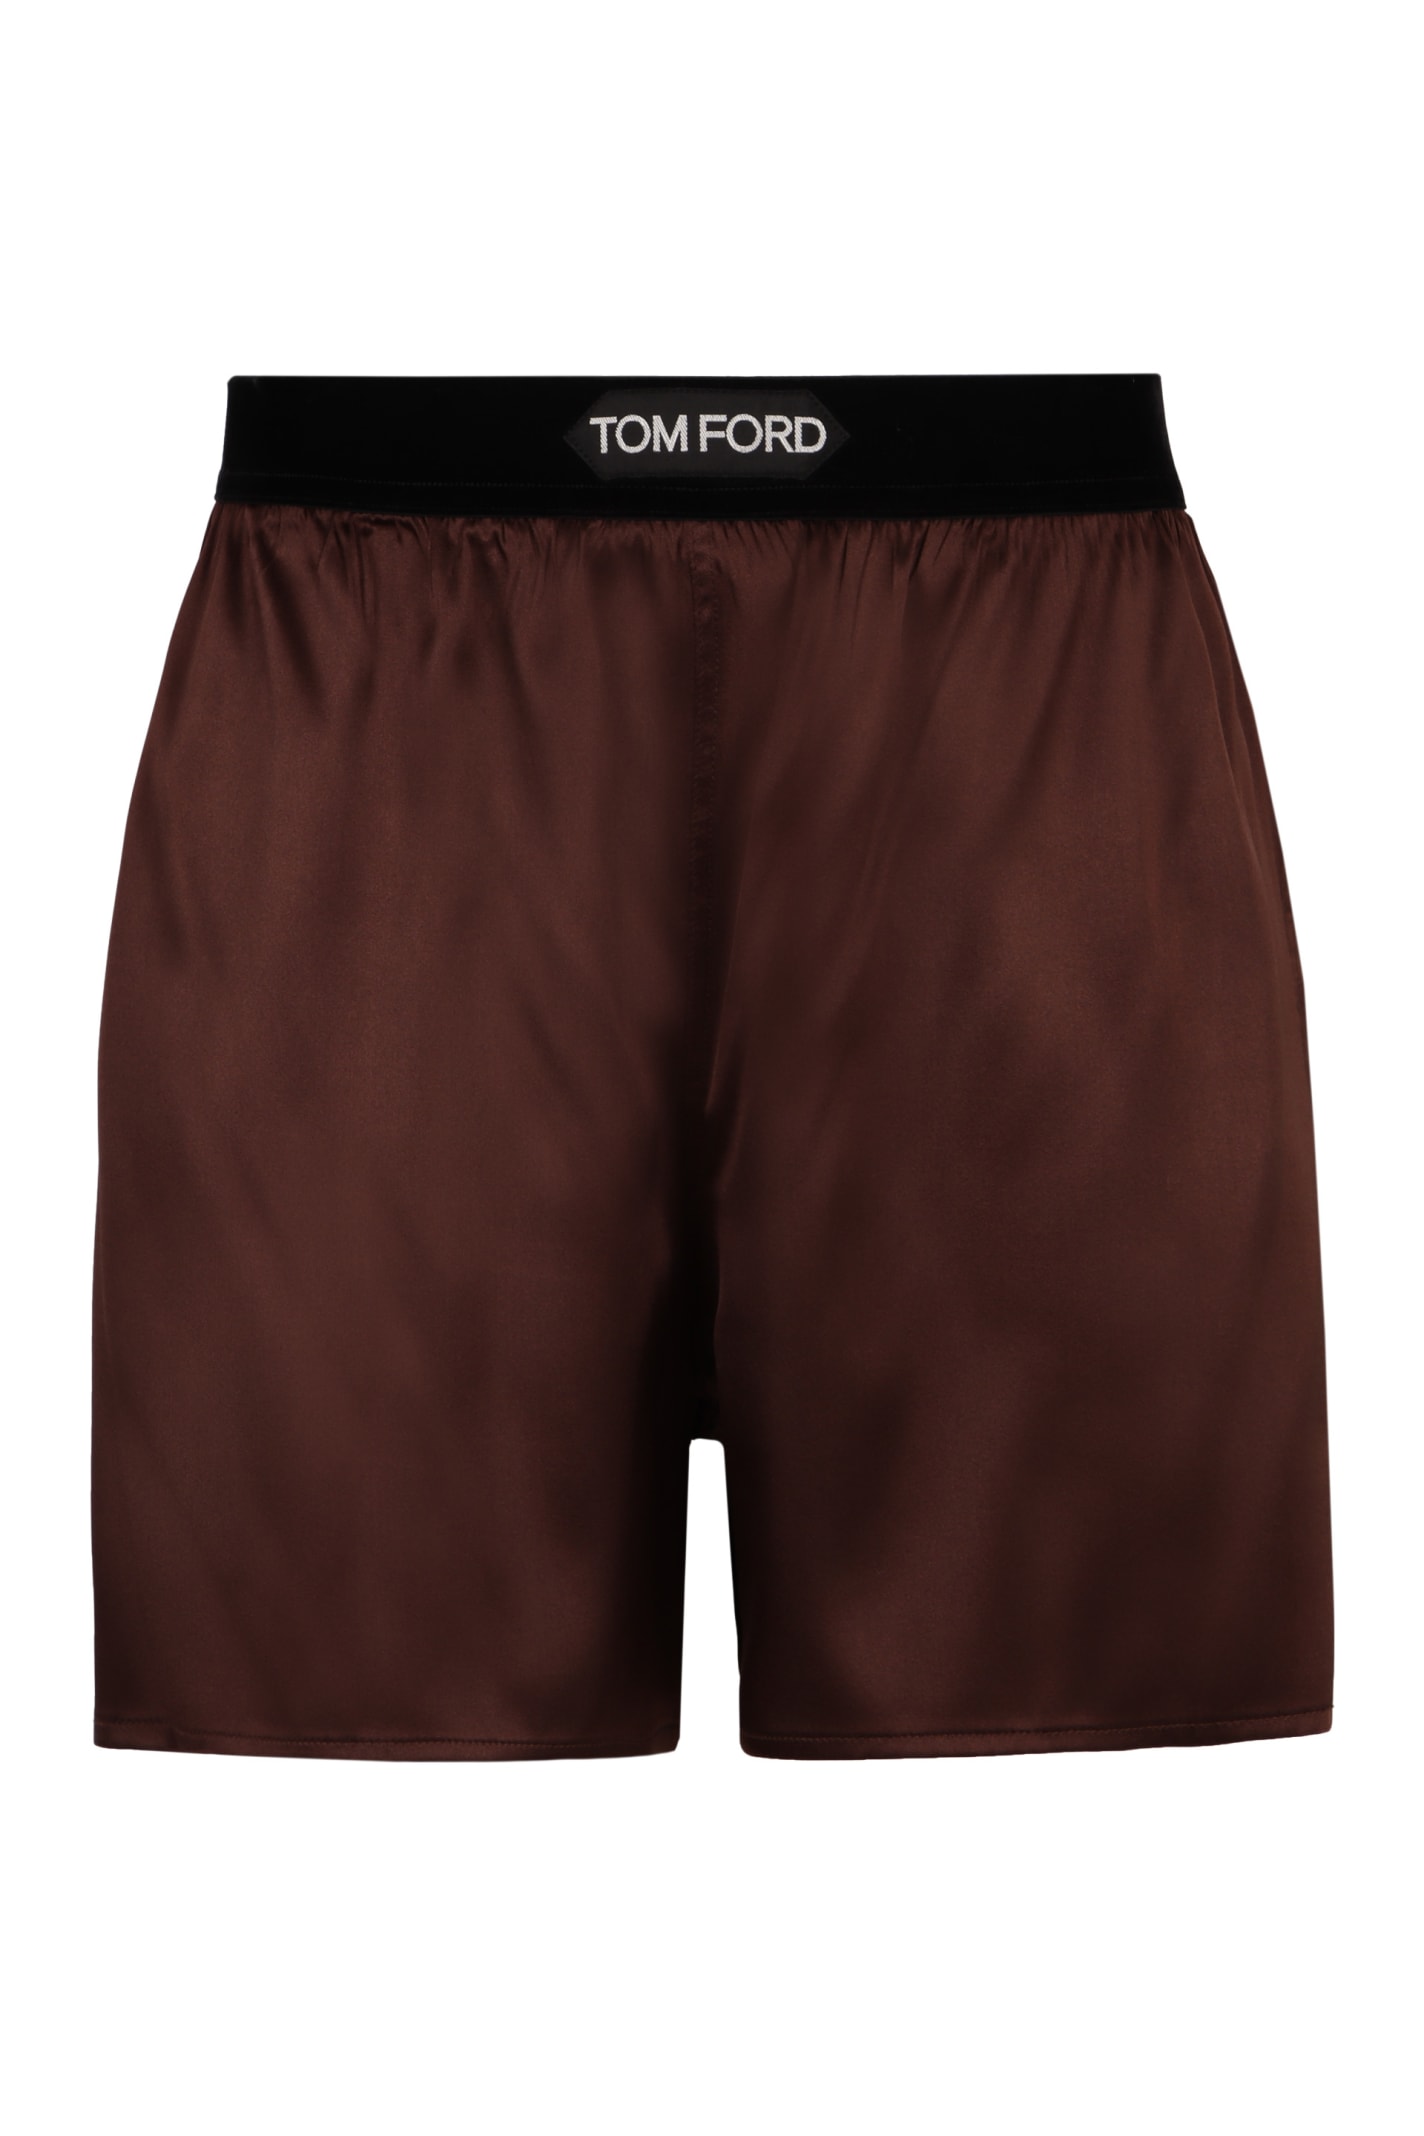 Tom Ford Satin Shorts In Brown